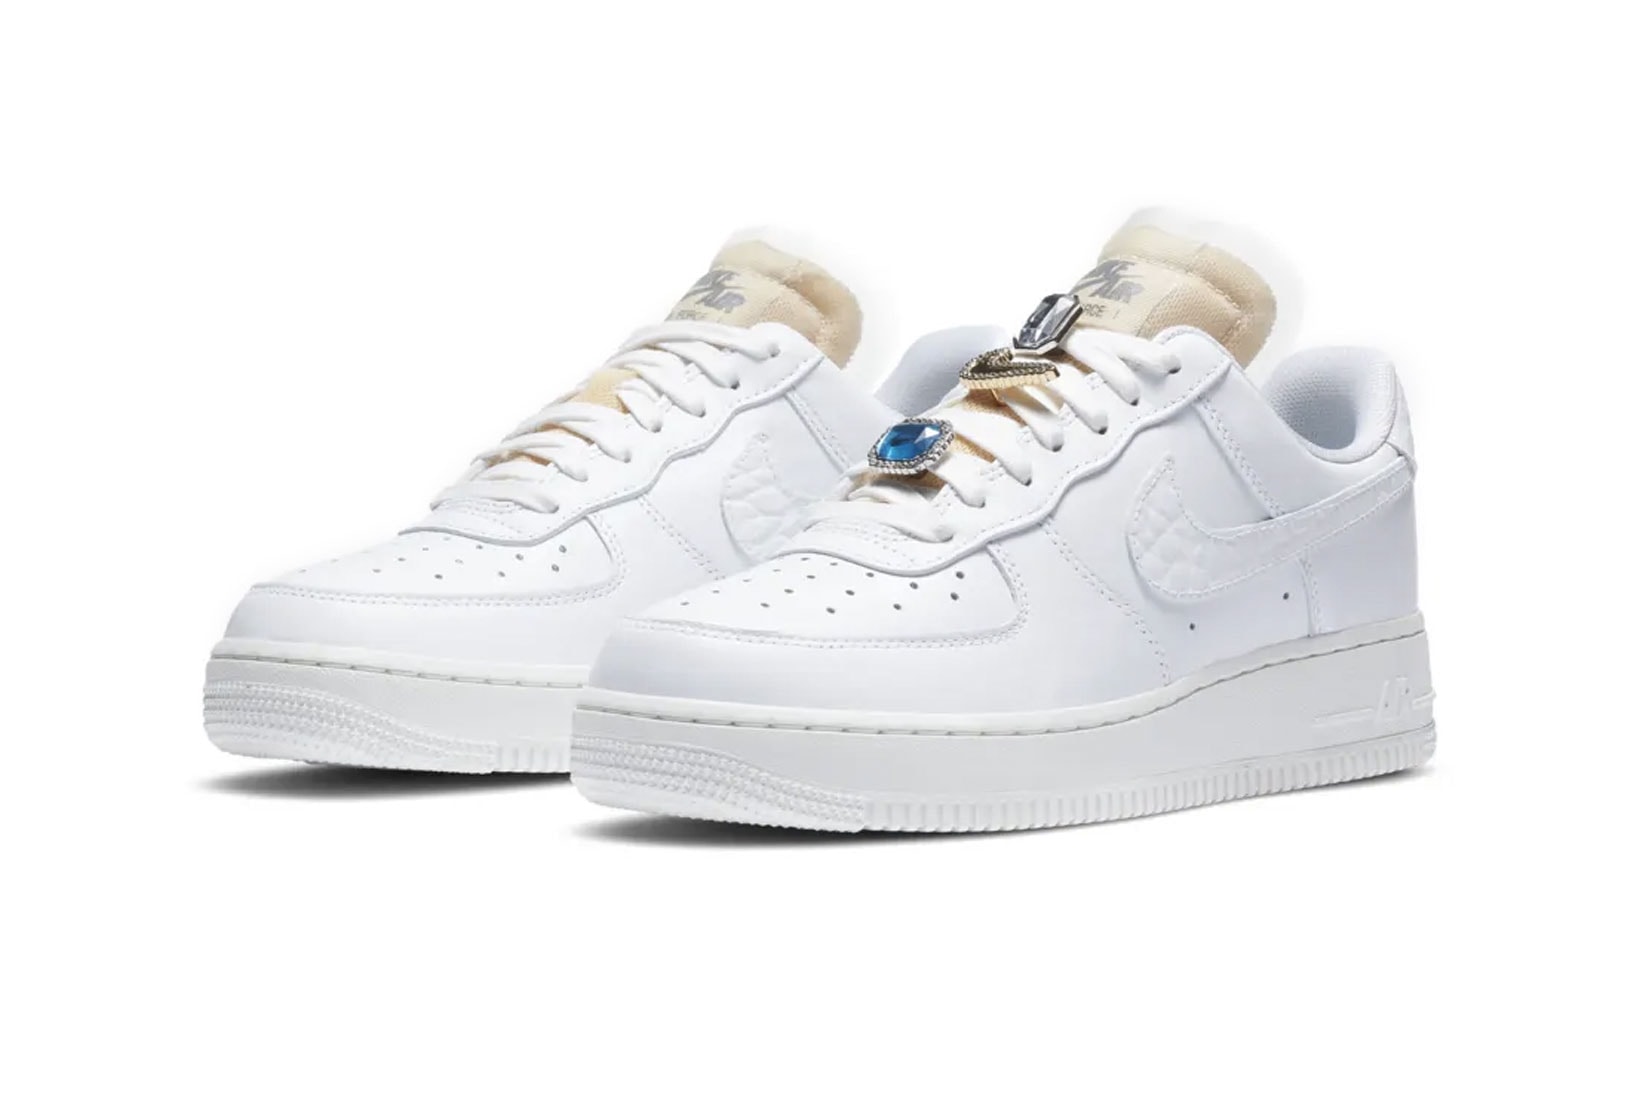 Nike Air Force 1 '07 LX White Lace AF1 Women's Sneakers Release Info